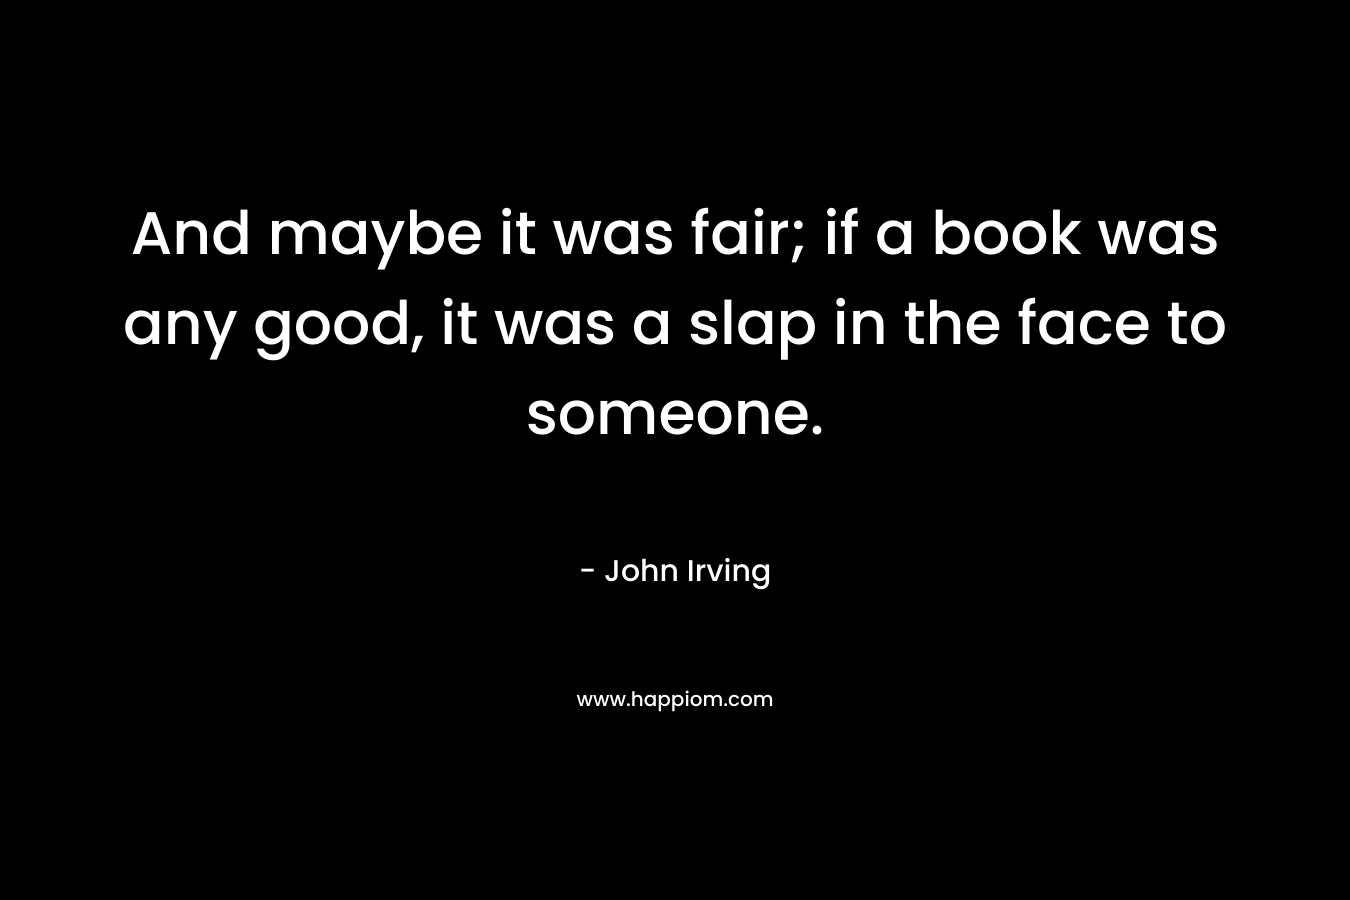 And maybe it was fair; if a book was any good, it was a slap in the face to someone. – John Irving